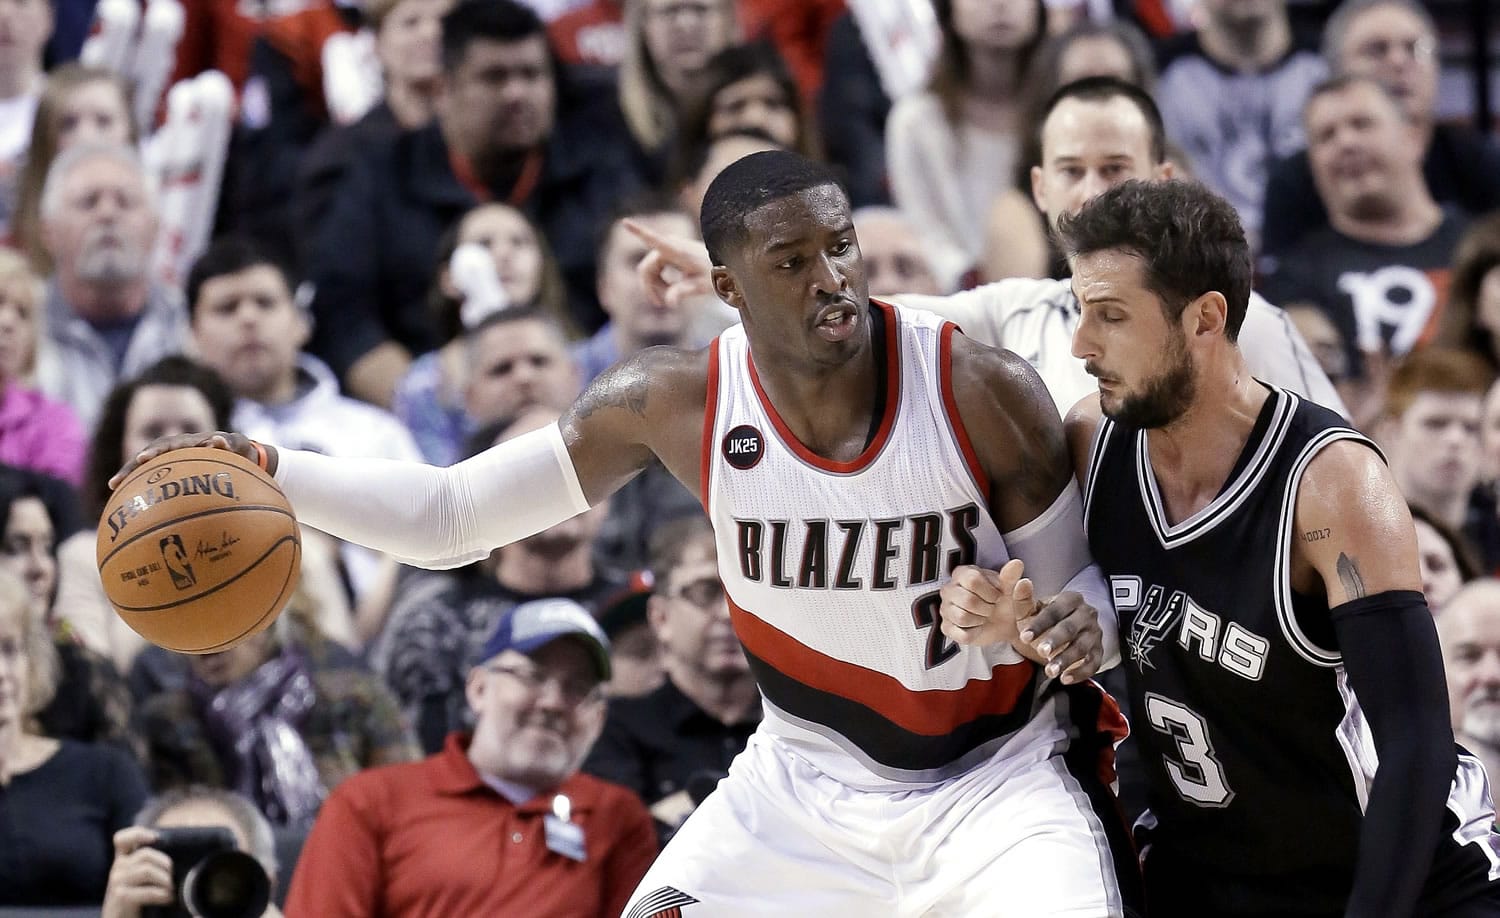 Portland Trail Blazers guard Wesley Matthews, left, works the ball in on San Antonio Spurs guard Marco Belinelli during the second half of an NBA basketball game in Portland, Ore., Wednesday, Feb. 25, 2015.  Matthews led the Trail Blazers in scoring with 31 points as Portland won 111-95.